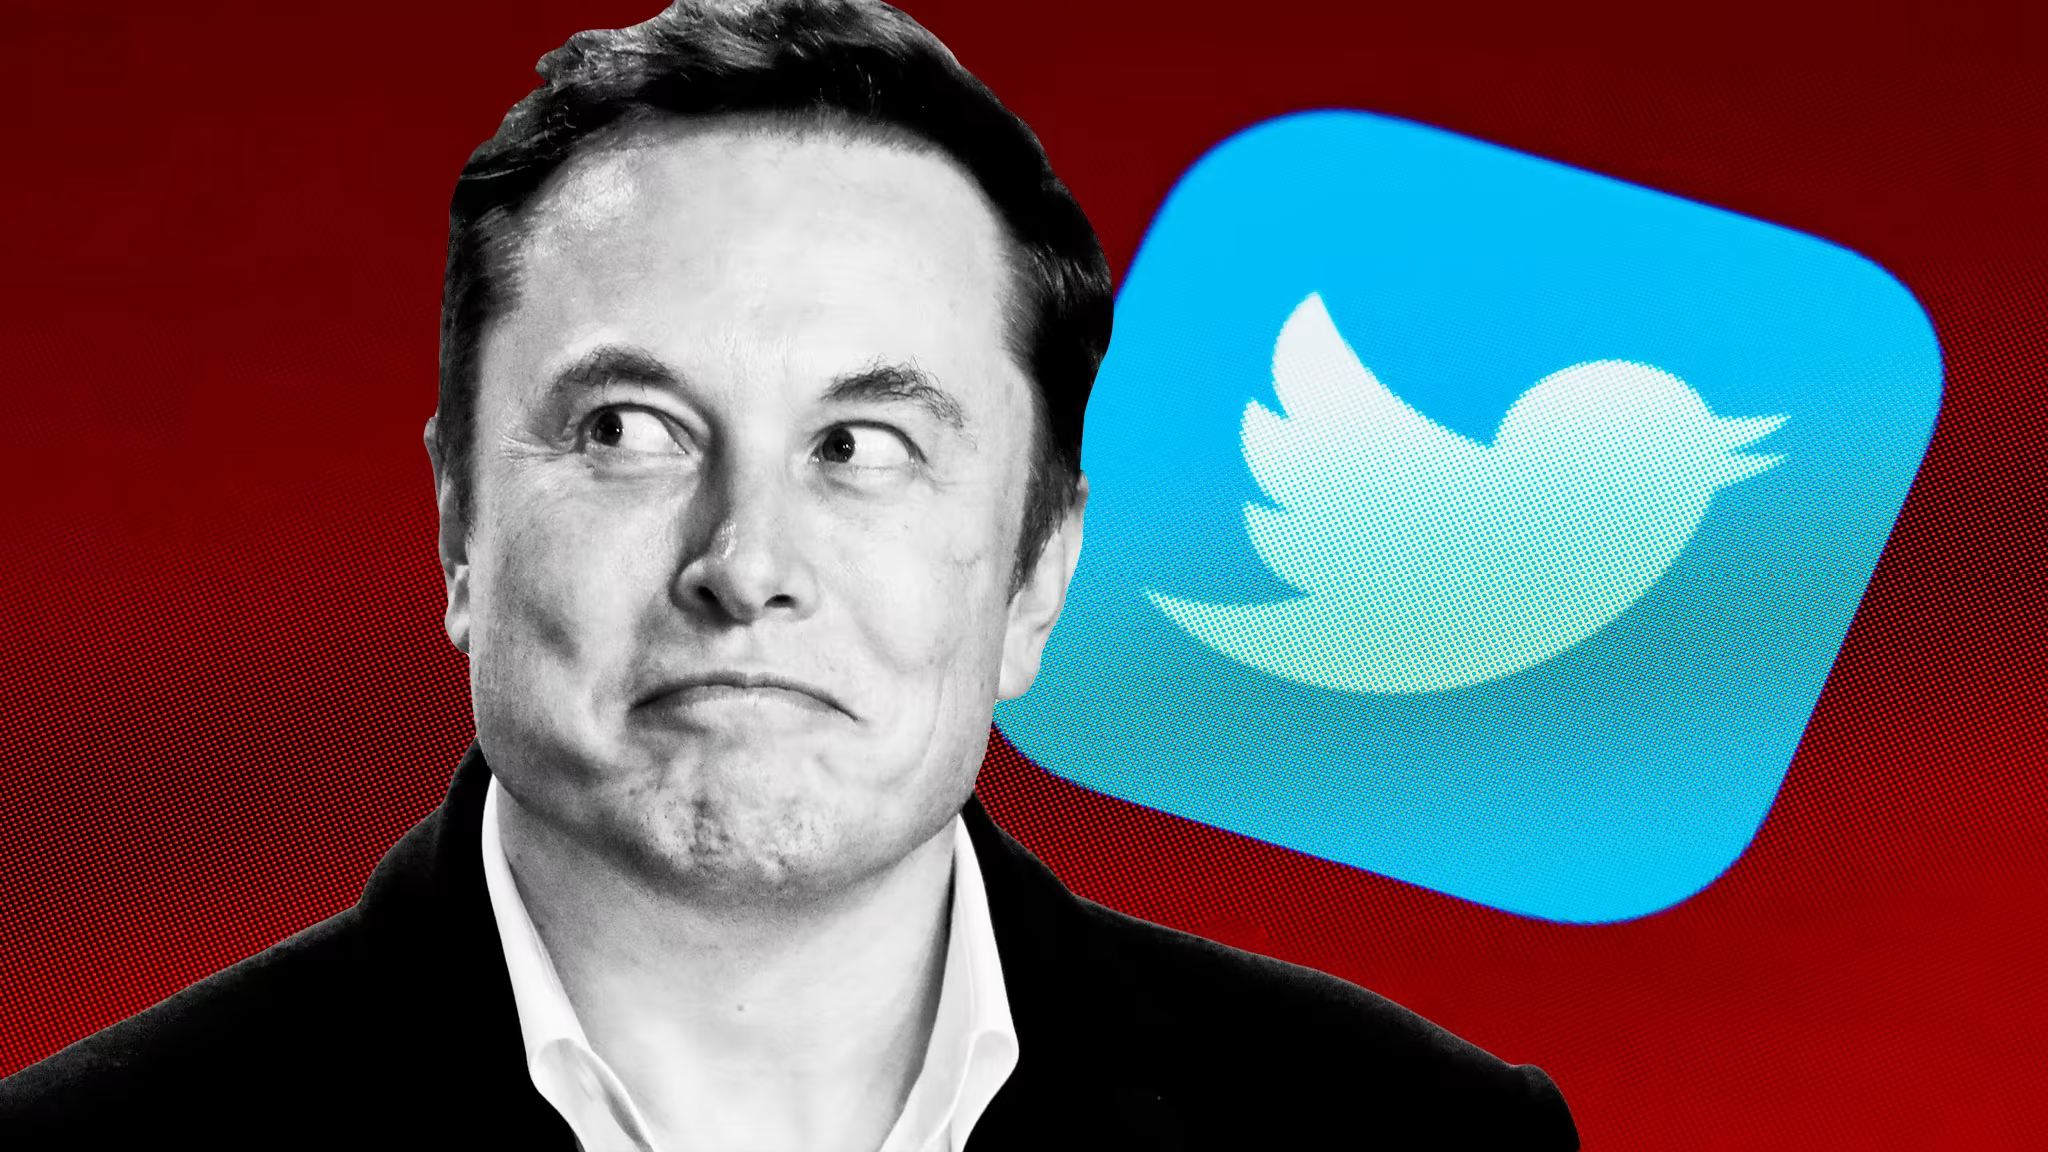 Elon Musk Receives $1.3 Billion From Crypto Friends To Support Twitter Deal. - CoinCu News